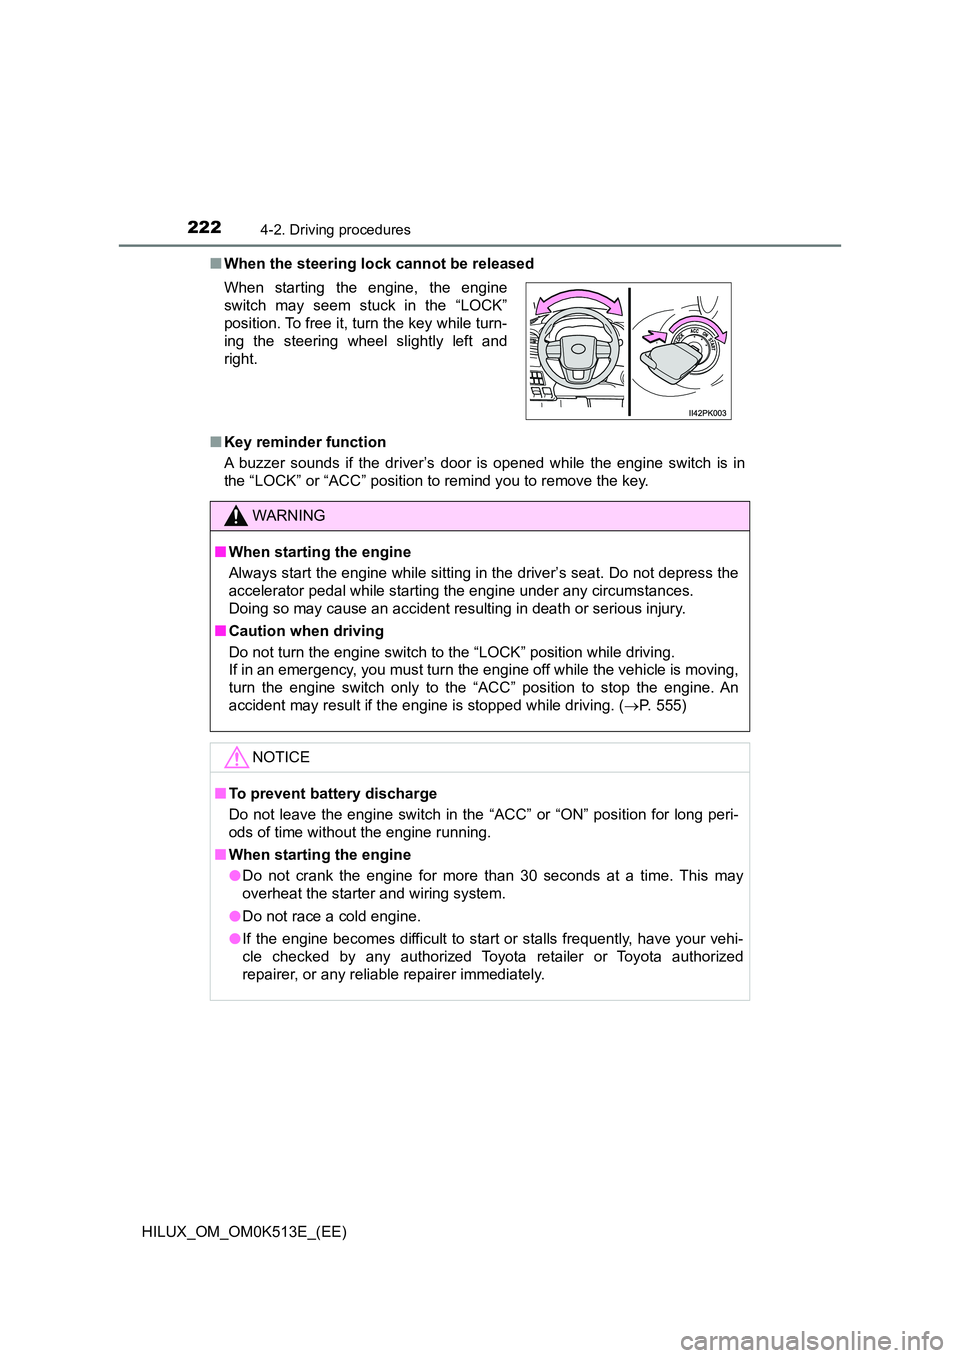 TOYOTA HILUX 2021  Owners Manual (in English) 2224-2. Driving procedures
HILUX_OM_OM0K513E_(EE) 
�Q When the steering lock cannot be released 
�Q Key reminder function 
A buzzer sounds if the driver’s door is opened while the engine switch is i